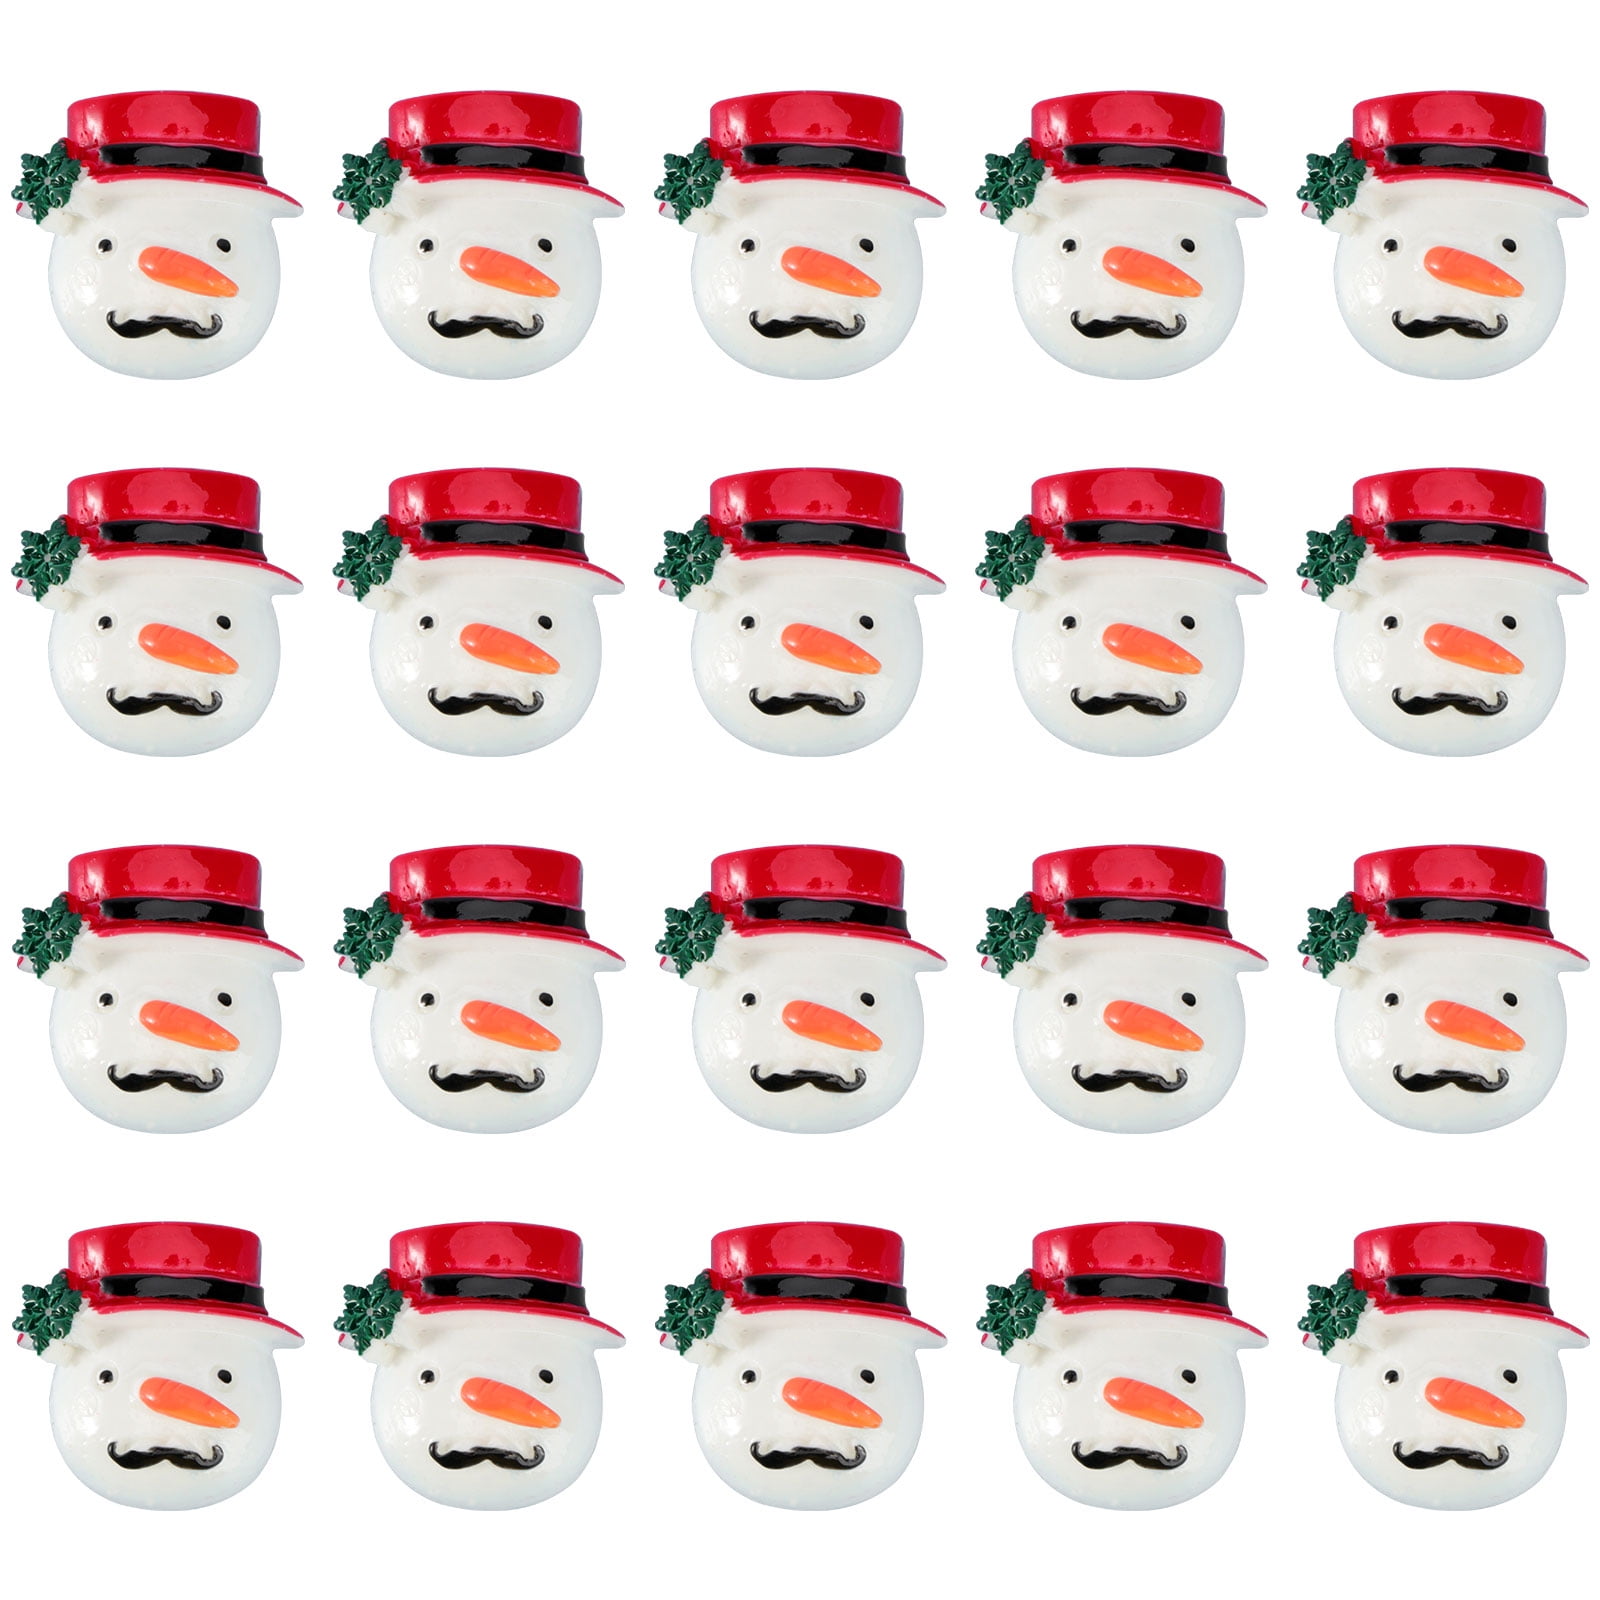 20Pcs Assorted Resin Christmas Flatback Ornaments Buttons for Crafts Decorations 